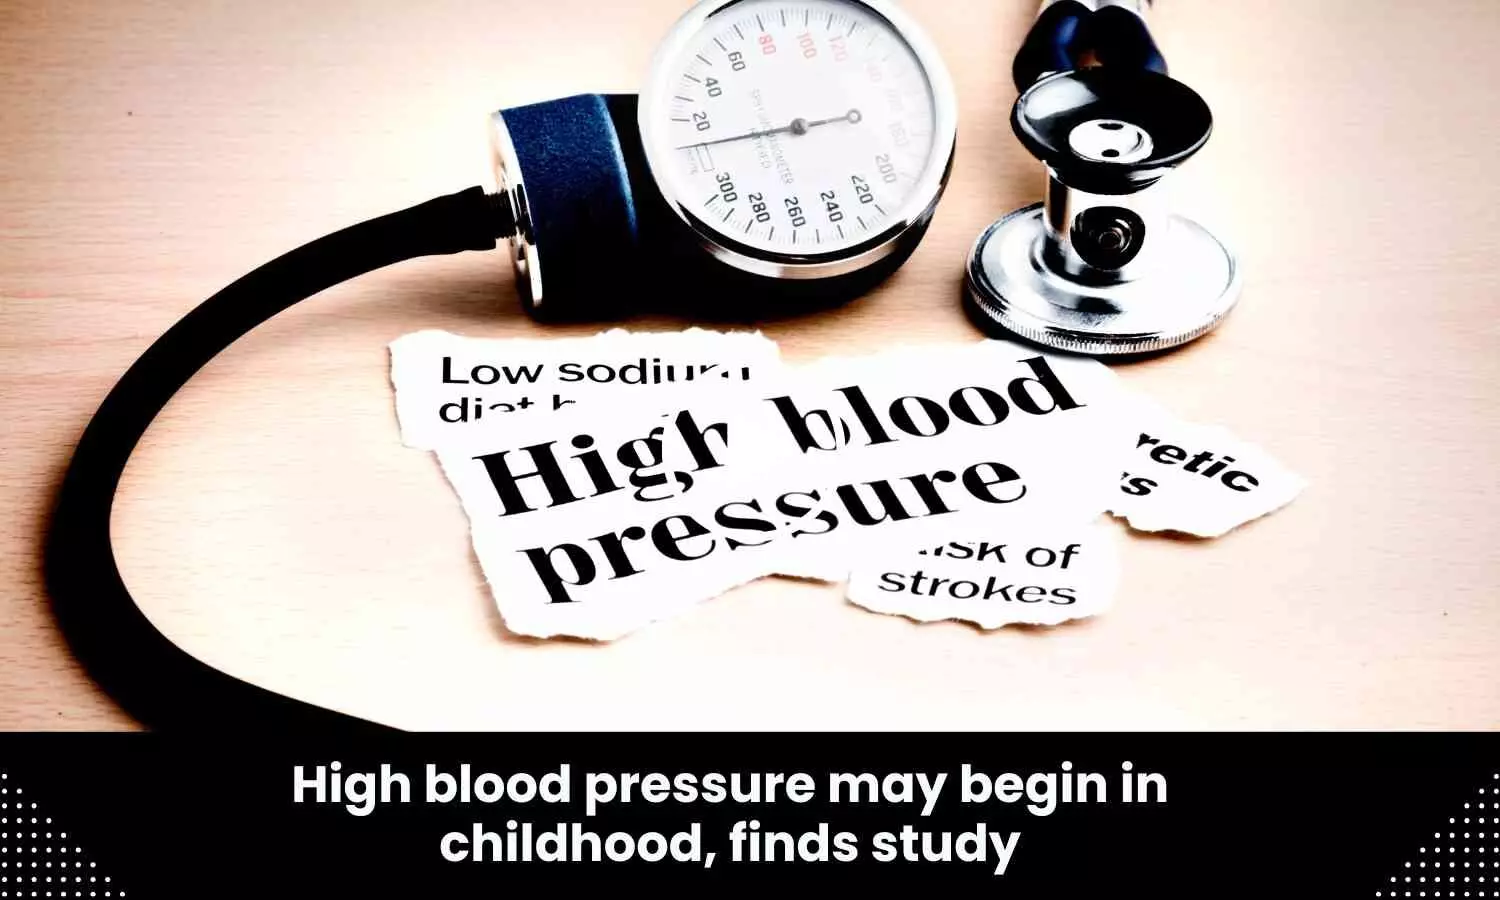 High blood pressure may begin in childhood, finds study